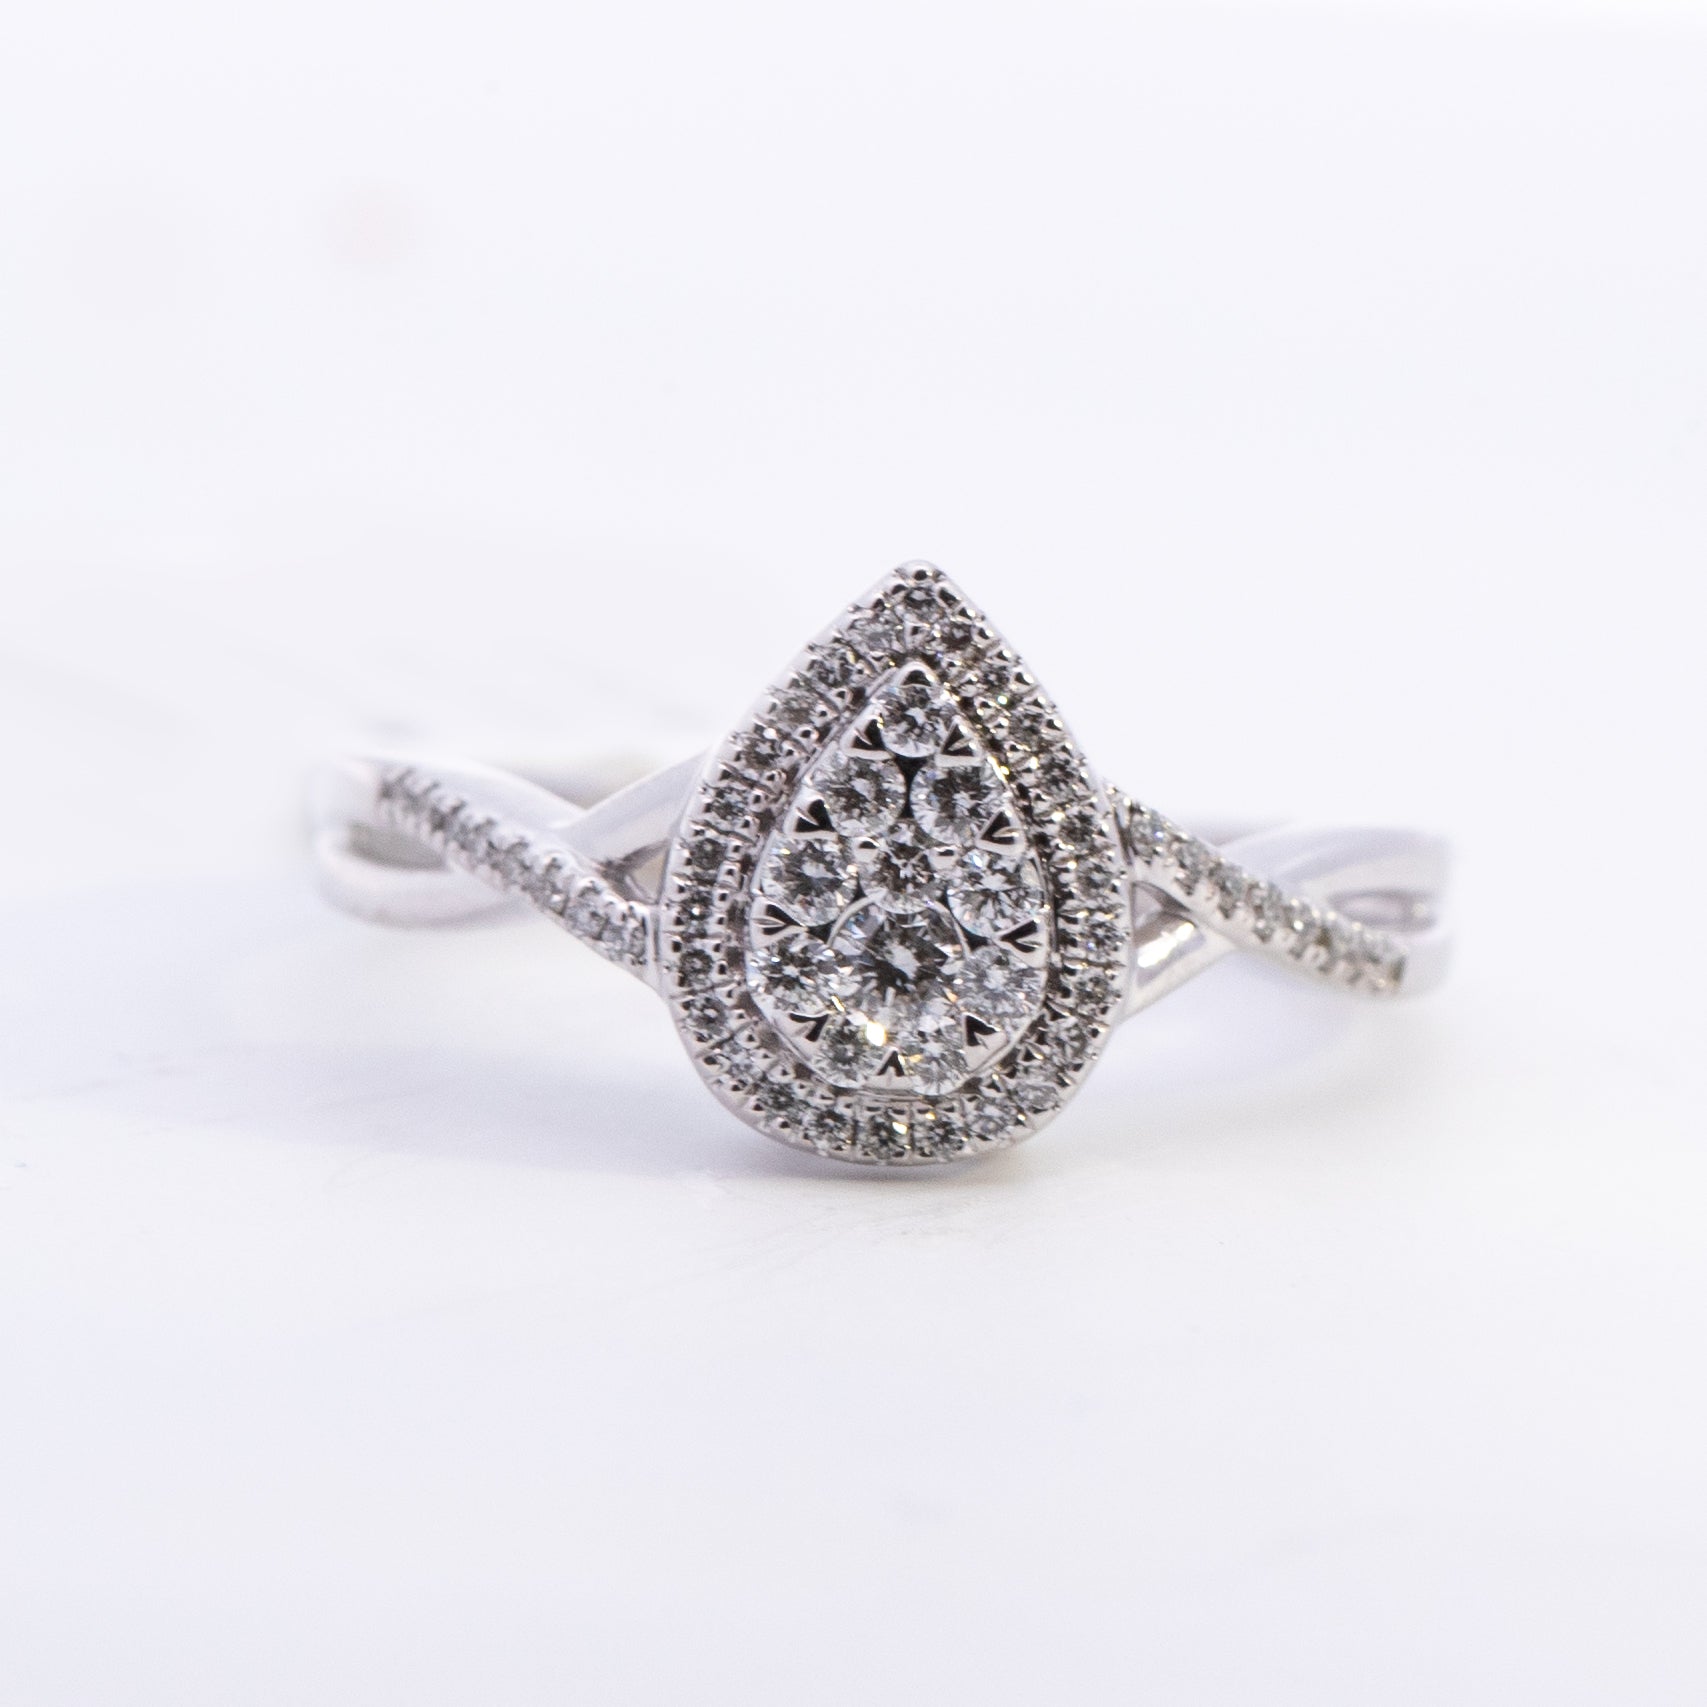 Cluster Entwined Engagement Ring - Diamond Engagement Rings